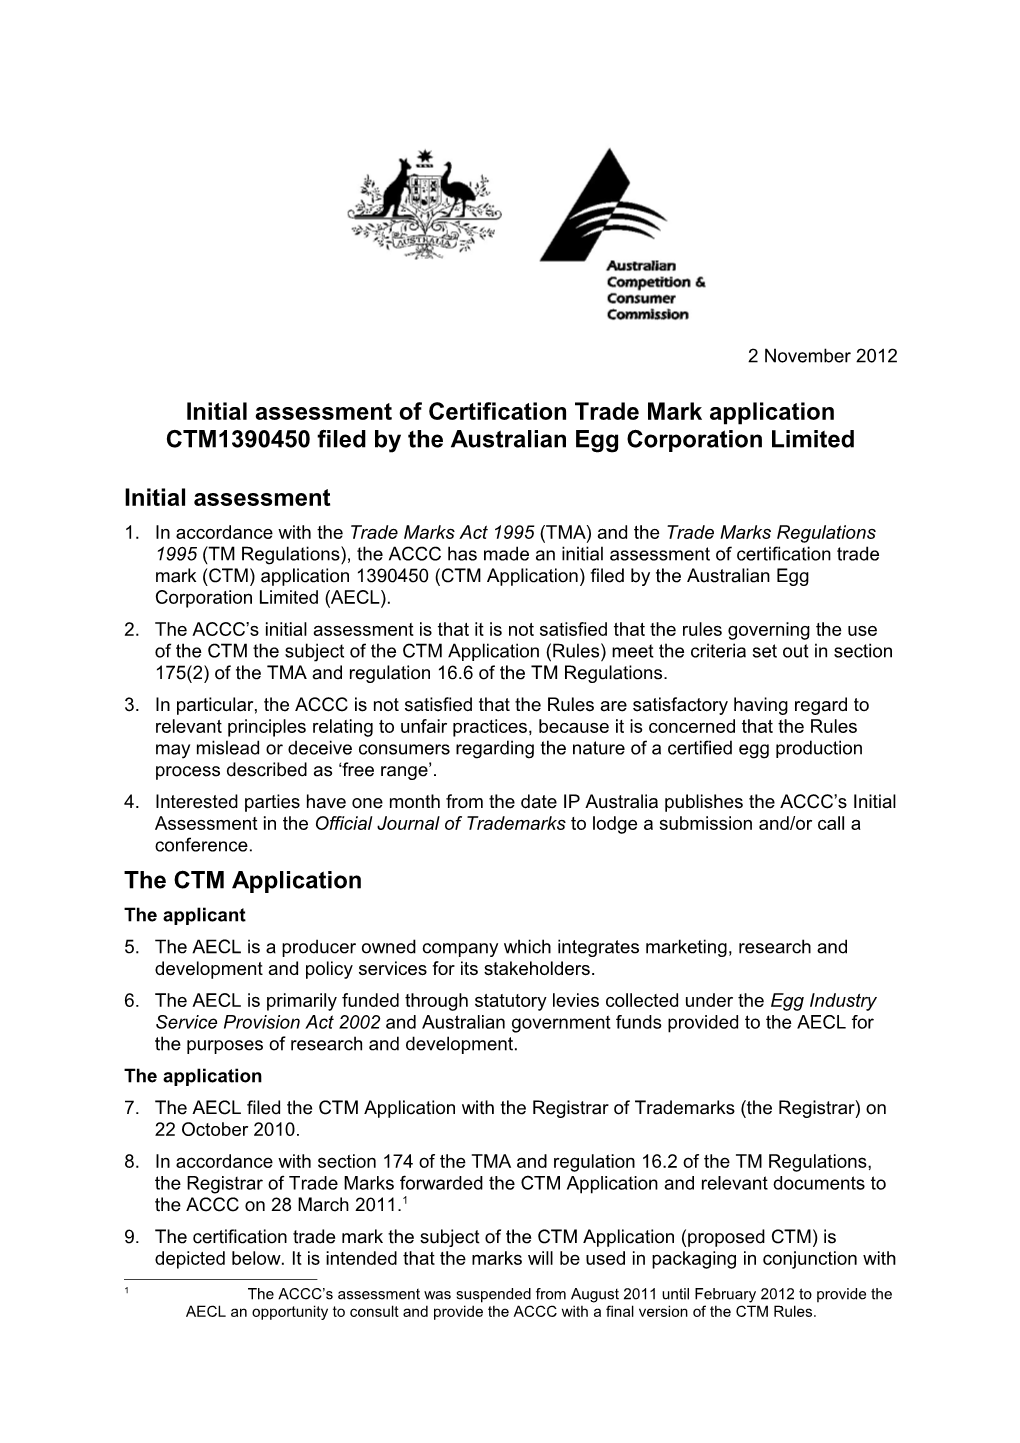 Initial Assessment of Certification Trade Mark